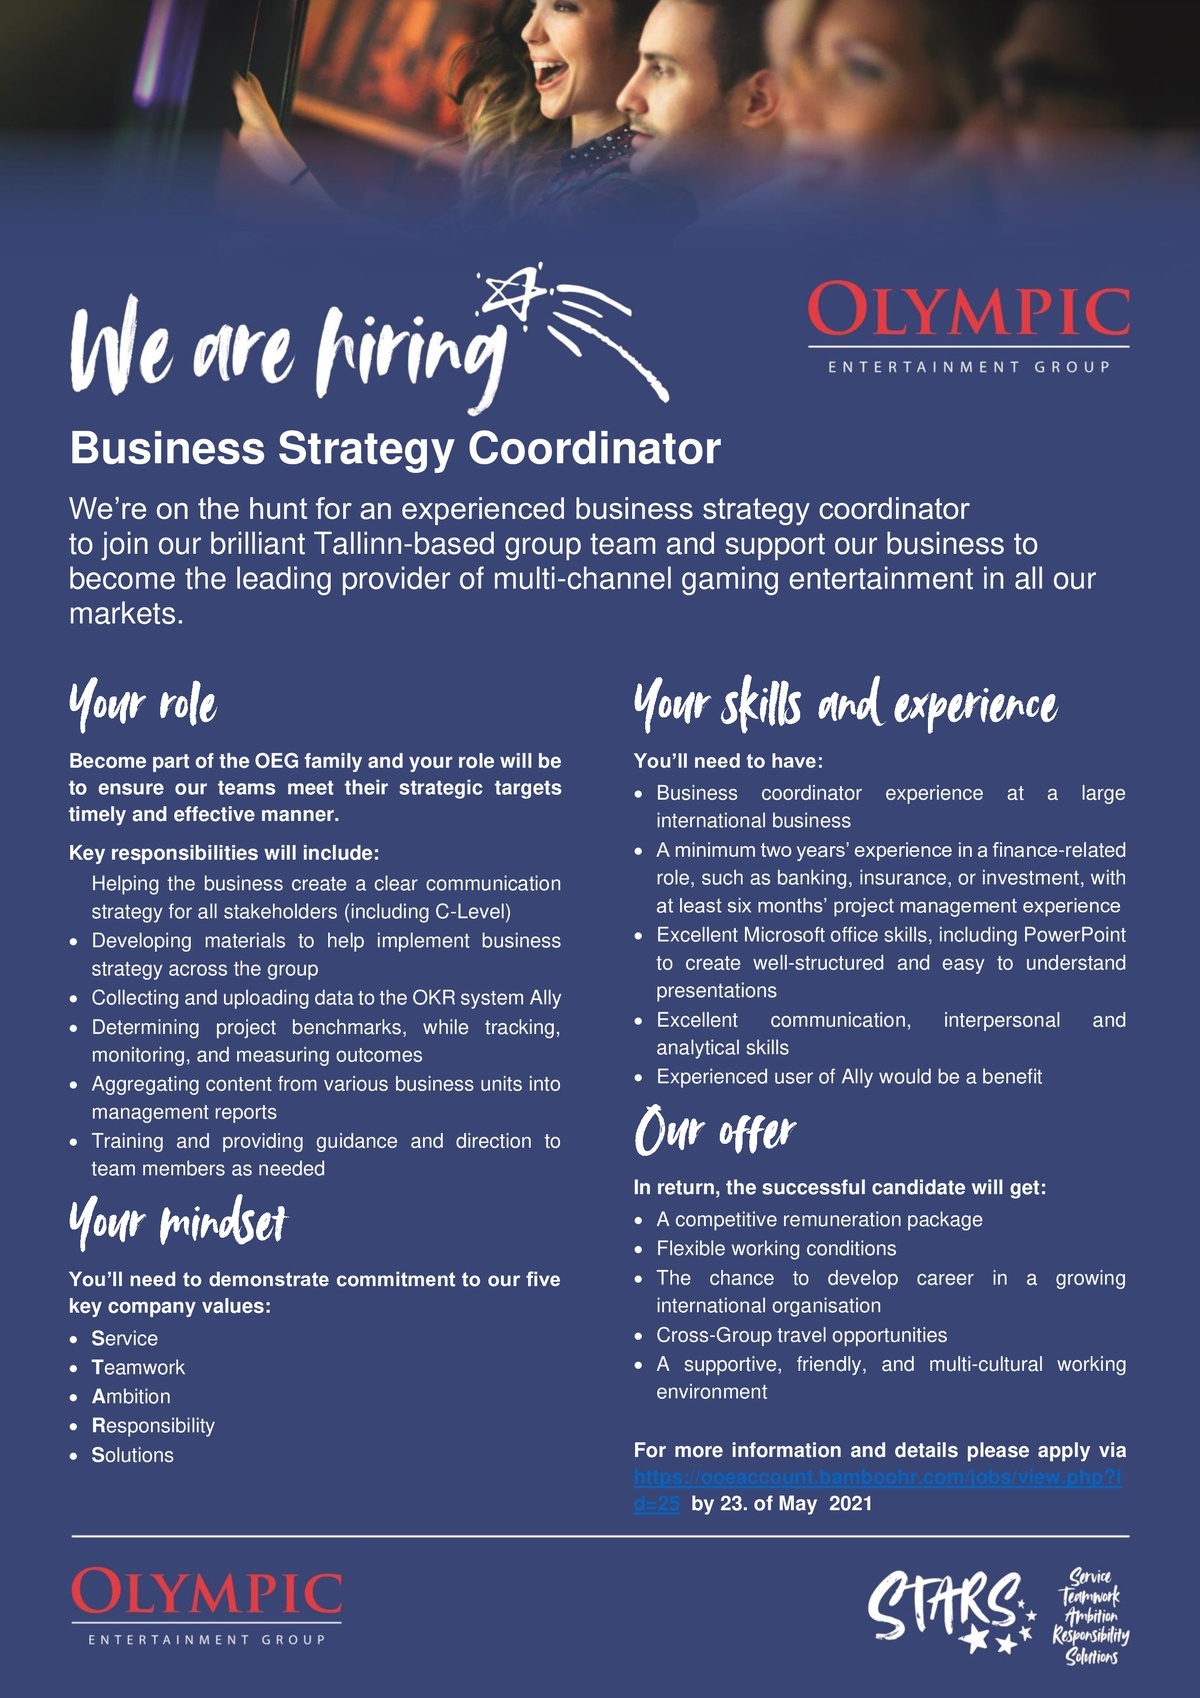 OLYMPIC ENTERTAINMENT GROUP AS Business Strategy Coordinator